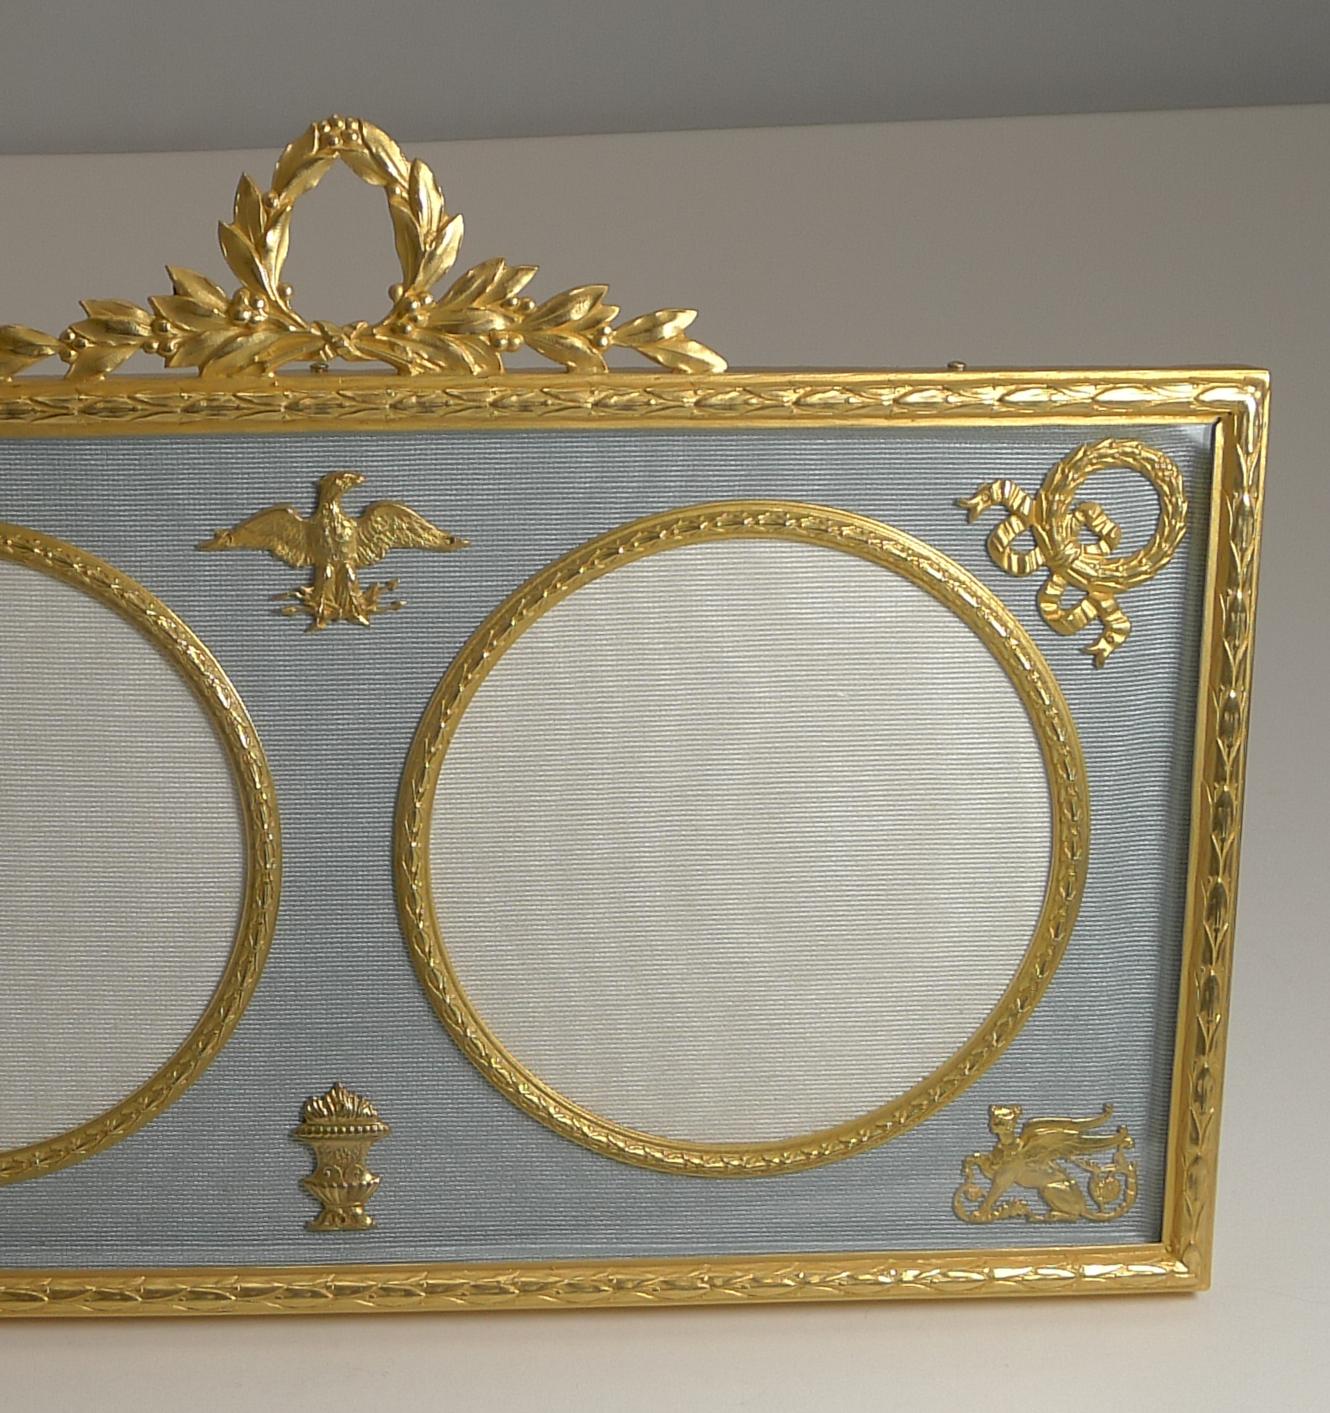 A very fine late Victorian Ormolu photograph / picture frame, French in origin and beautifully restored to it's former glory.

Behind the glass the frame is decorated with a grey / blue silk taffeta with two circular picture apertures measuring 3